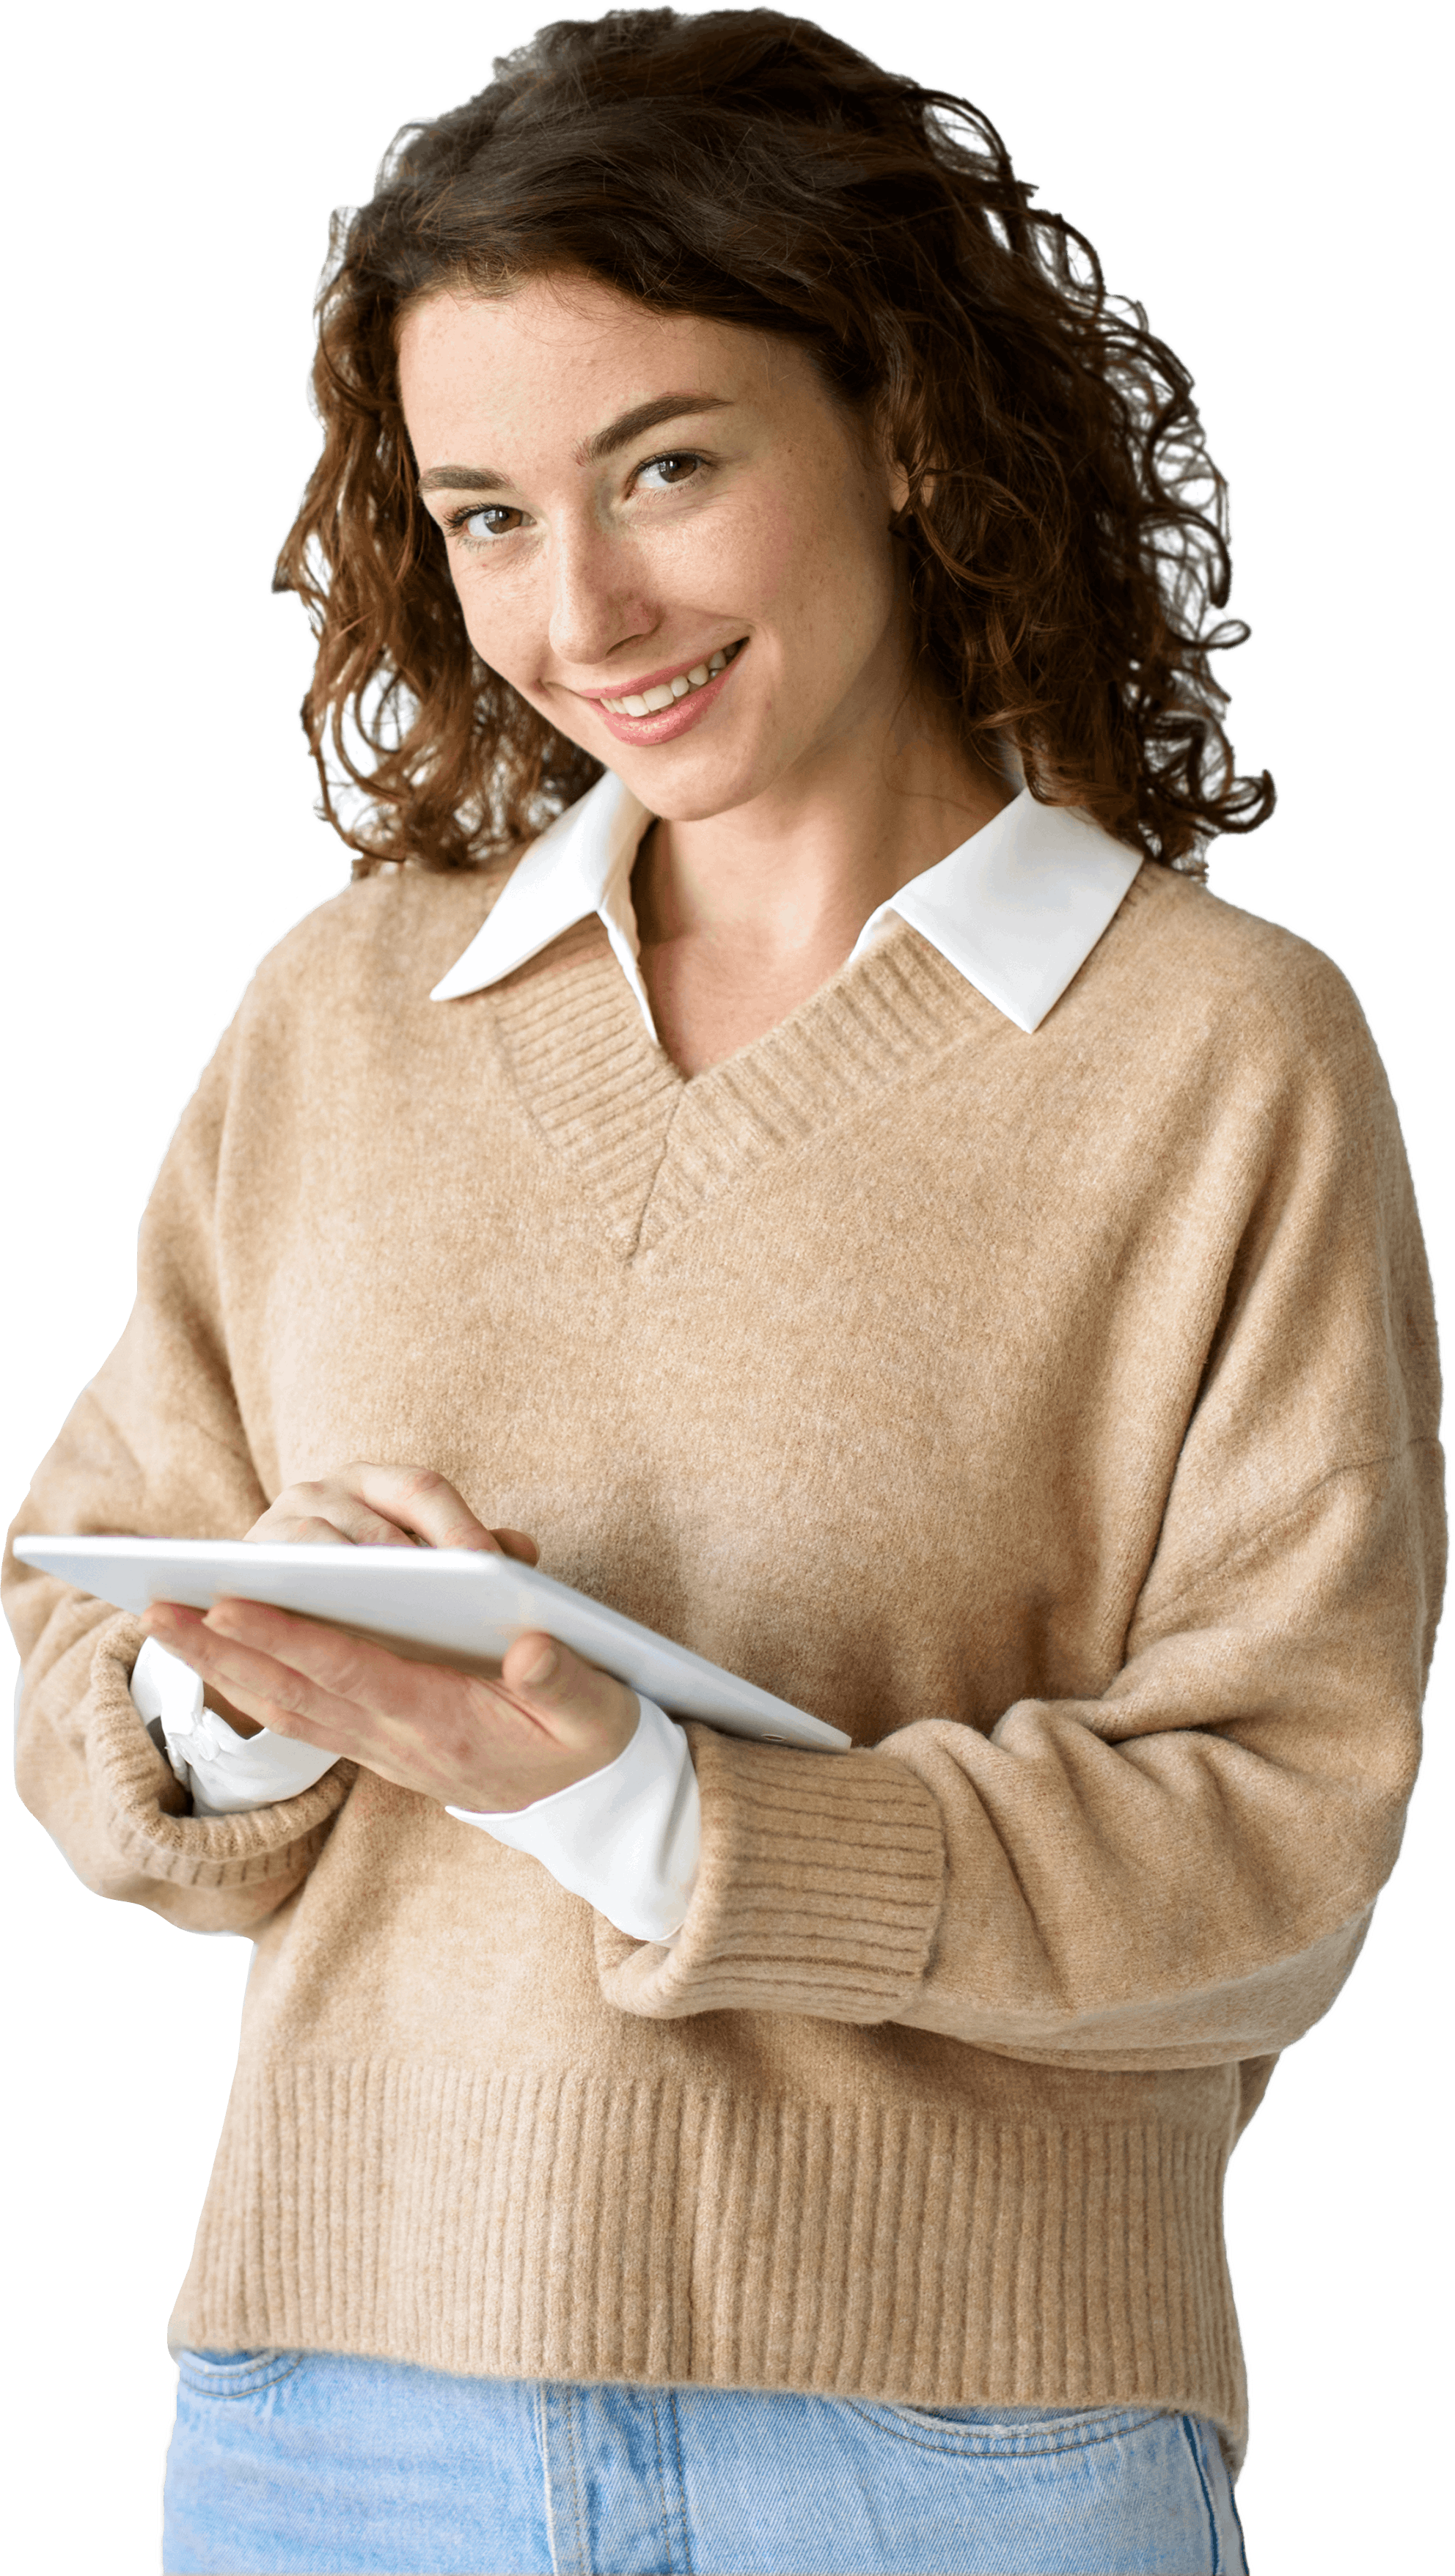 Woman smiling and holding iPad